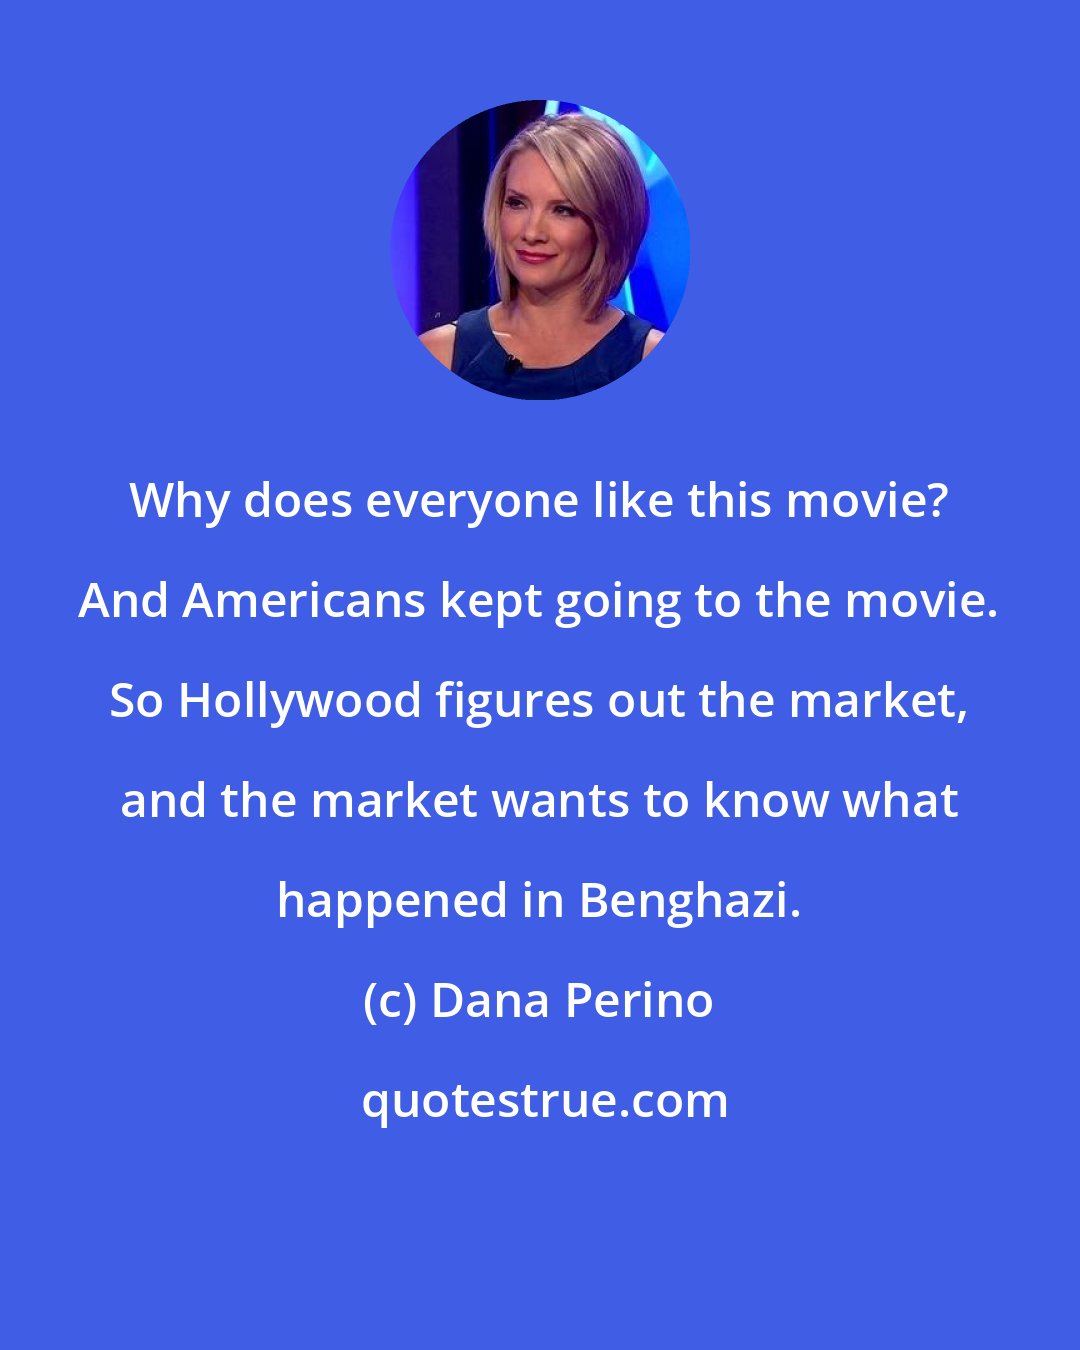 Dana Perino: Why does everyone like this movie? And Americans kept going to the movie. So Hollywood figures out the market, and the market wants to know what happened in Benghazi.